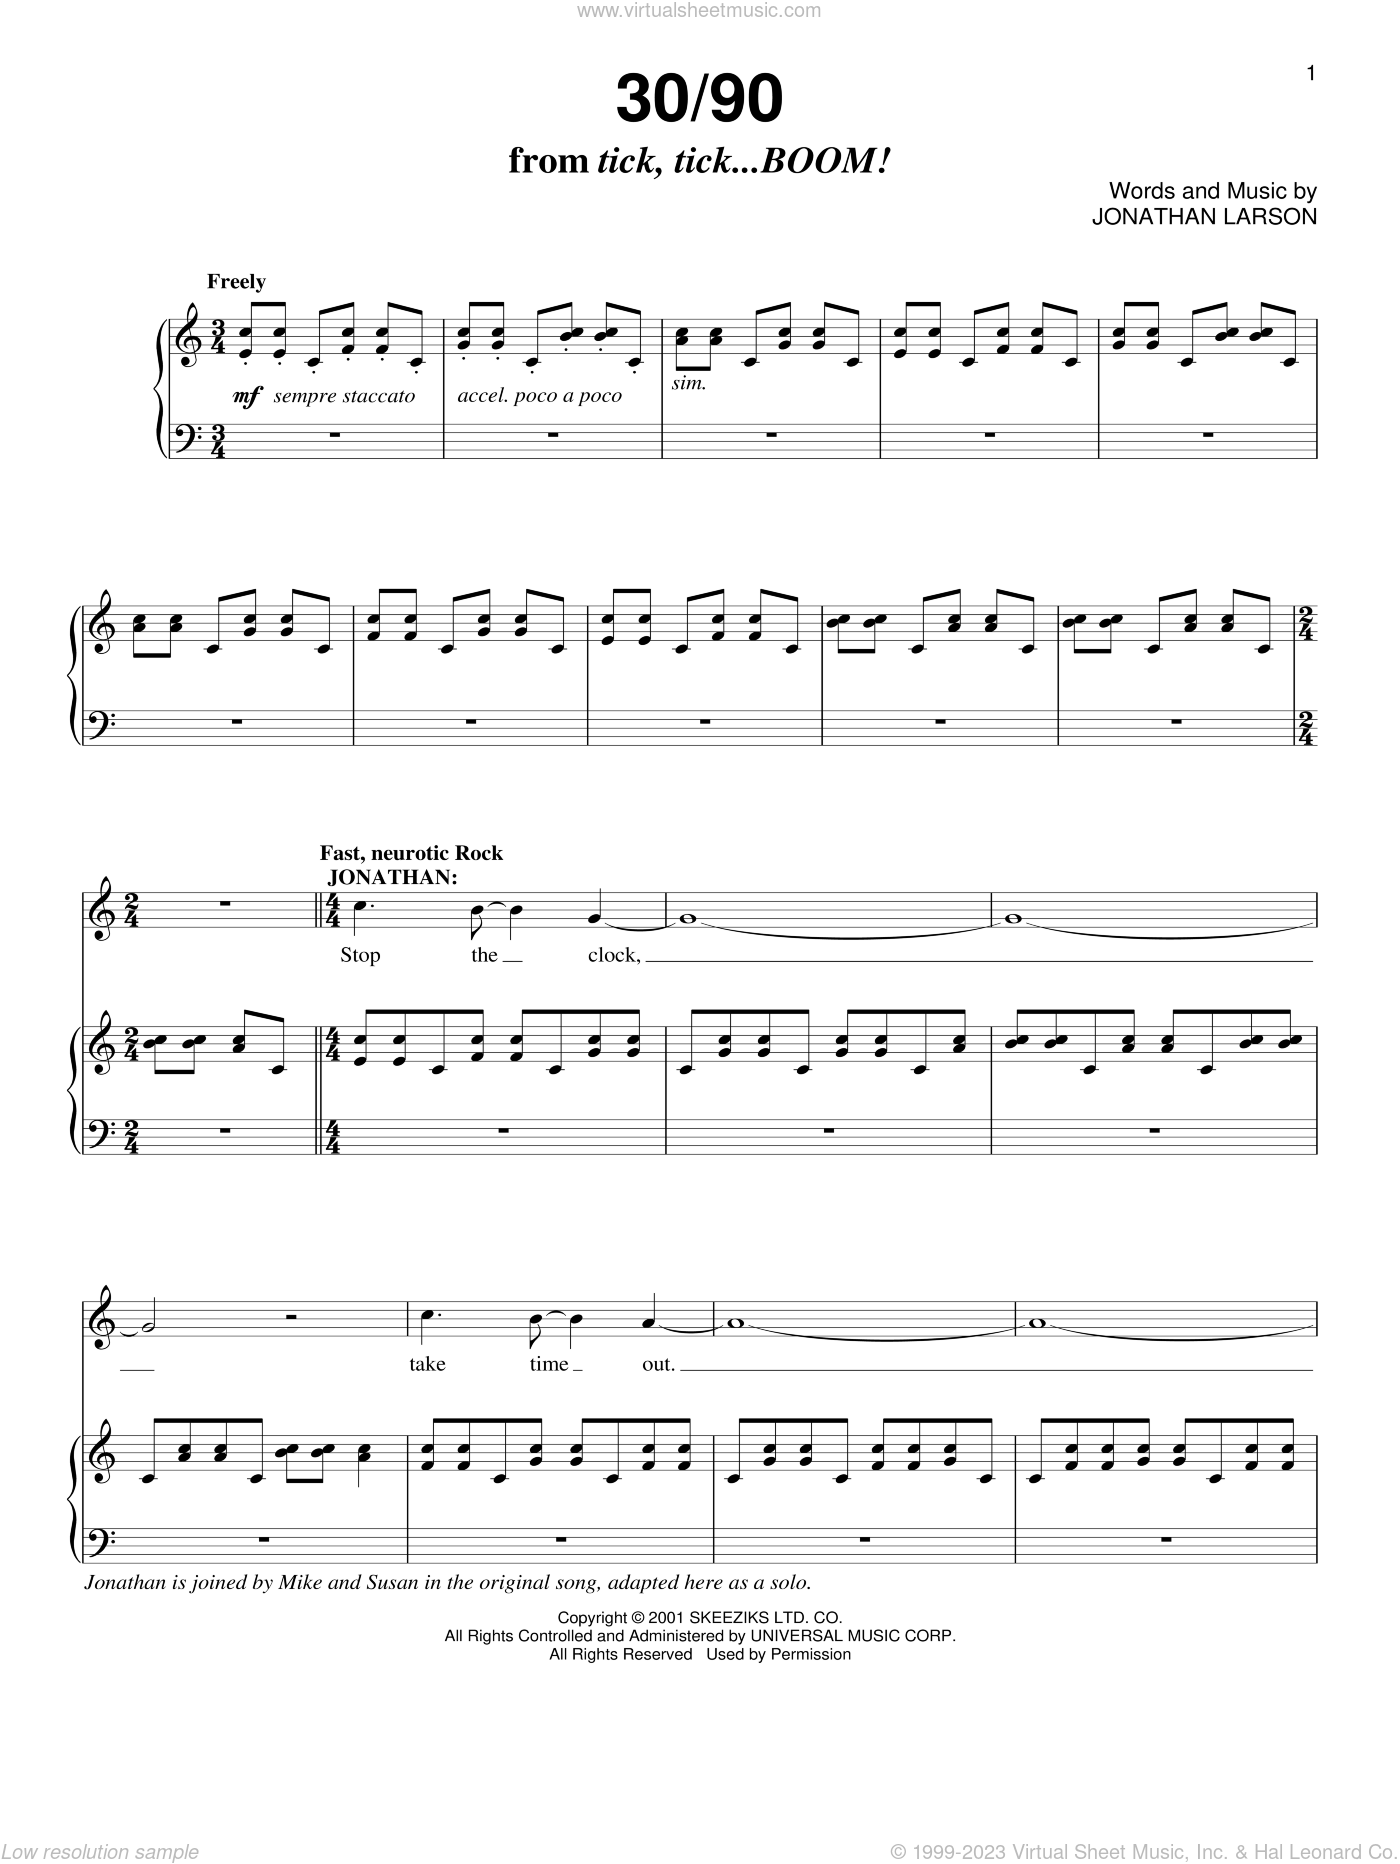 Larson - 30/90 sheet music for voice and piano [PDF-interactive]